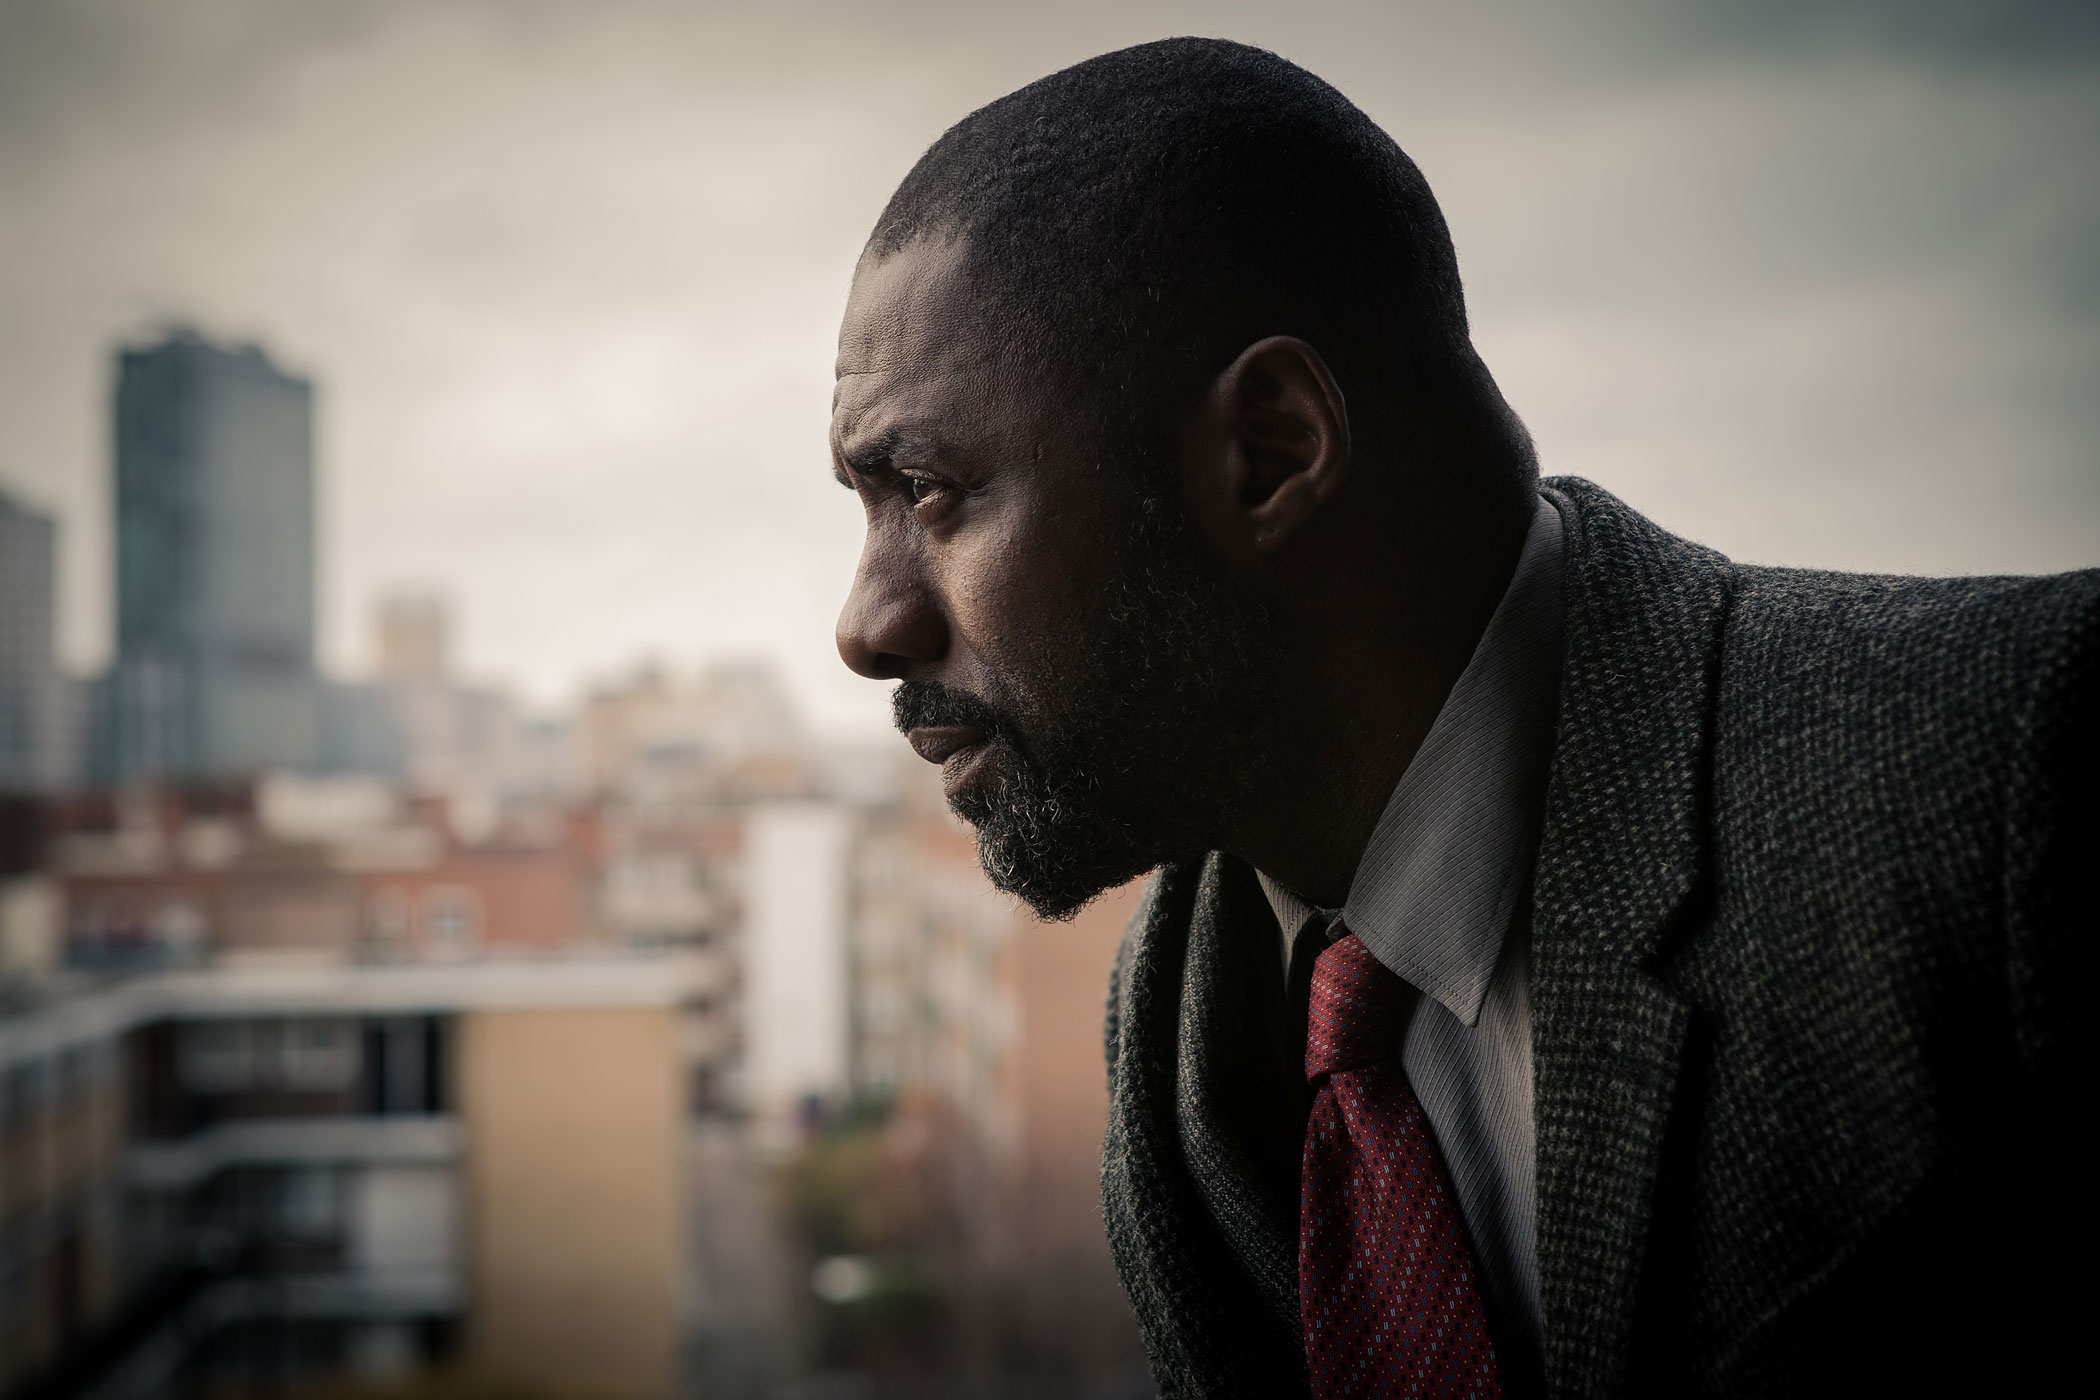 LUTHER Series 3